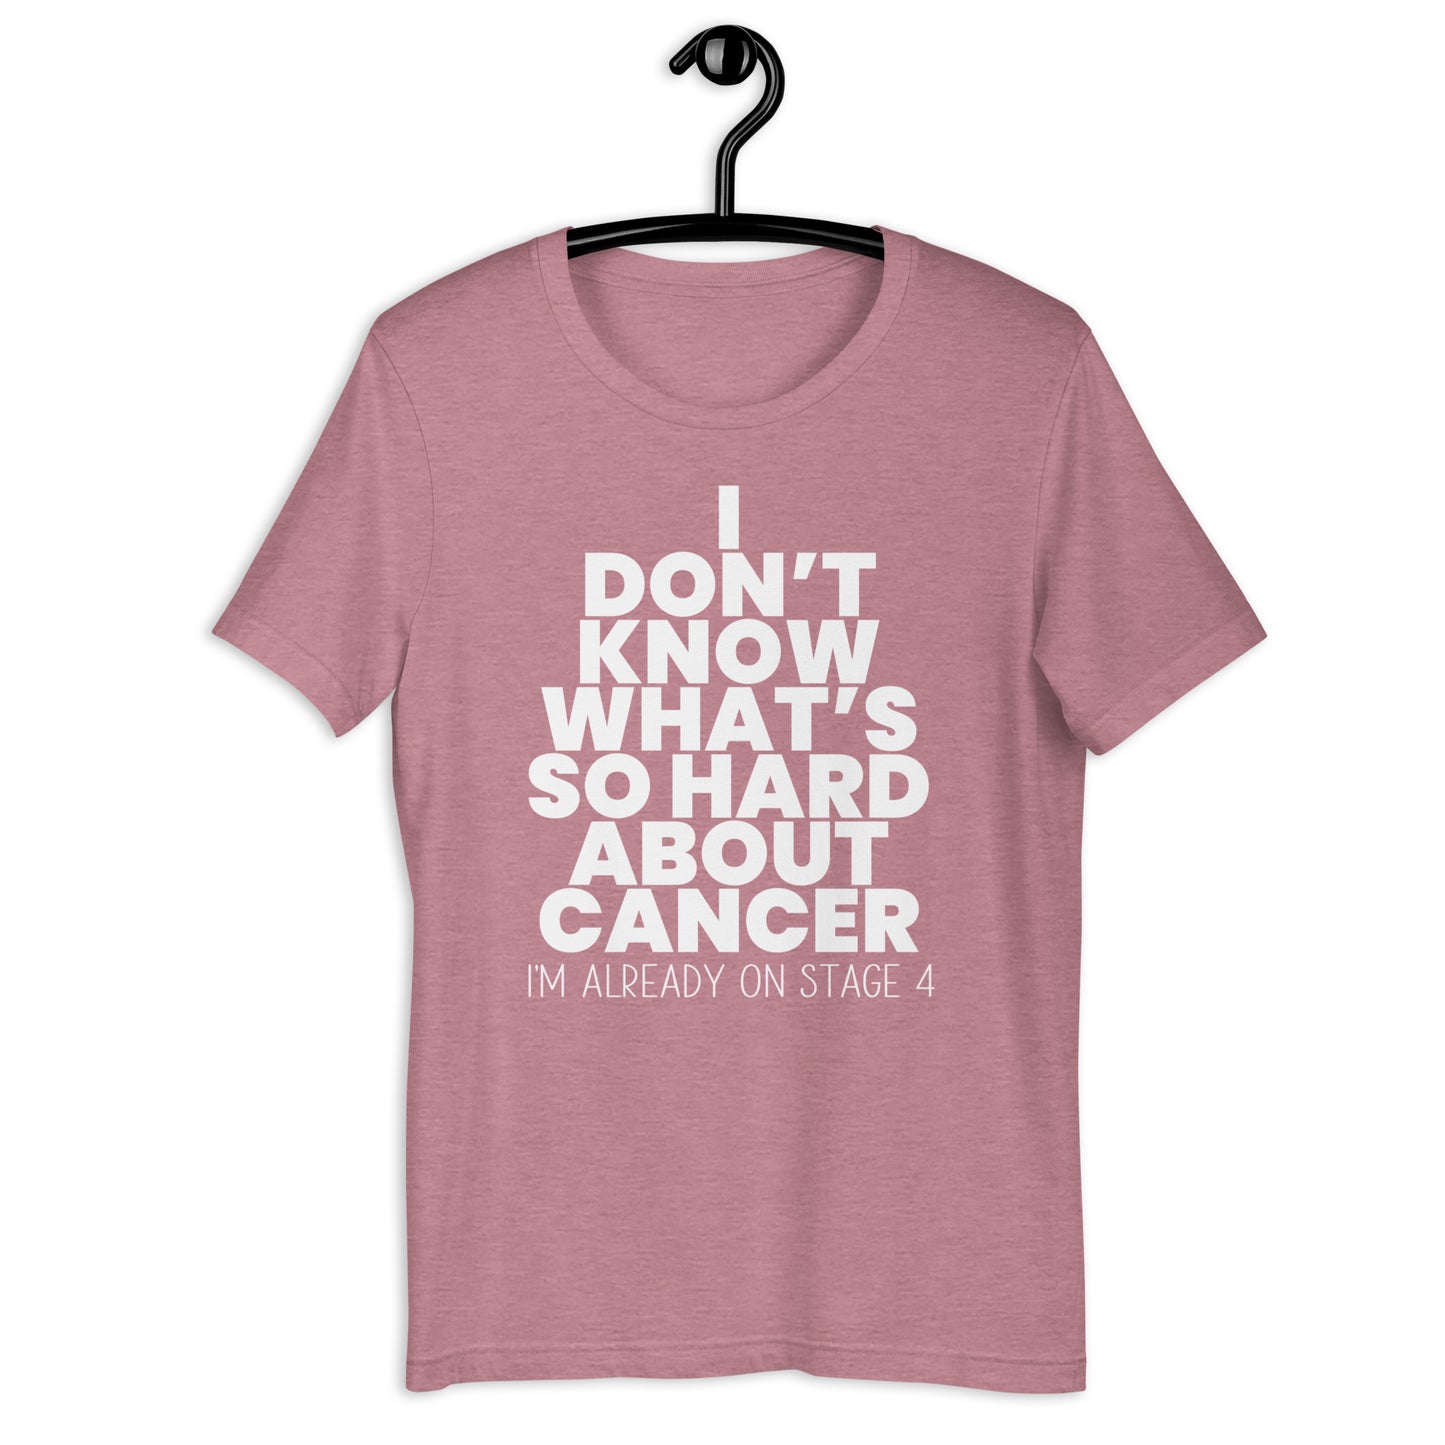 What's So Hard About Cancer? Tee